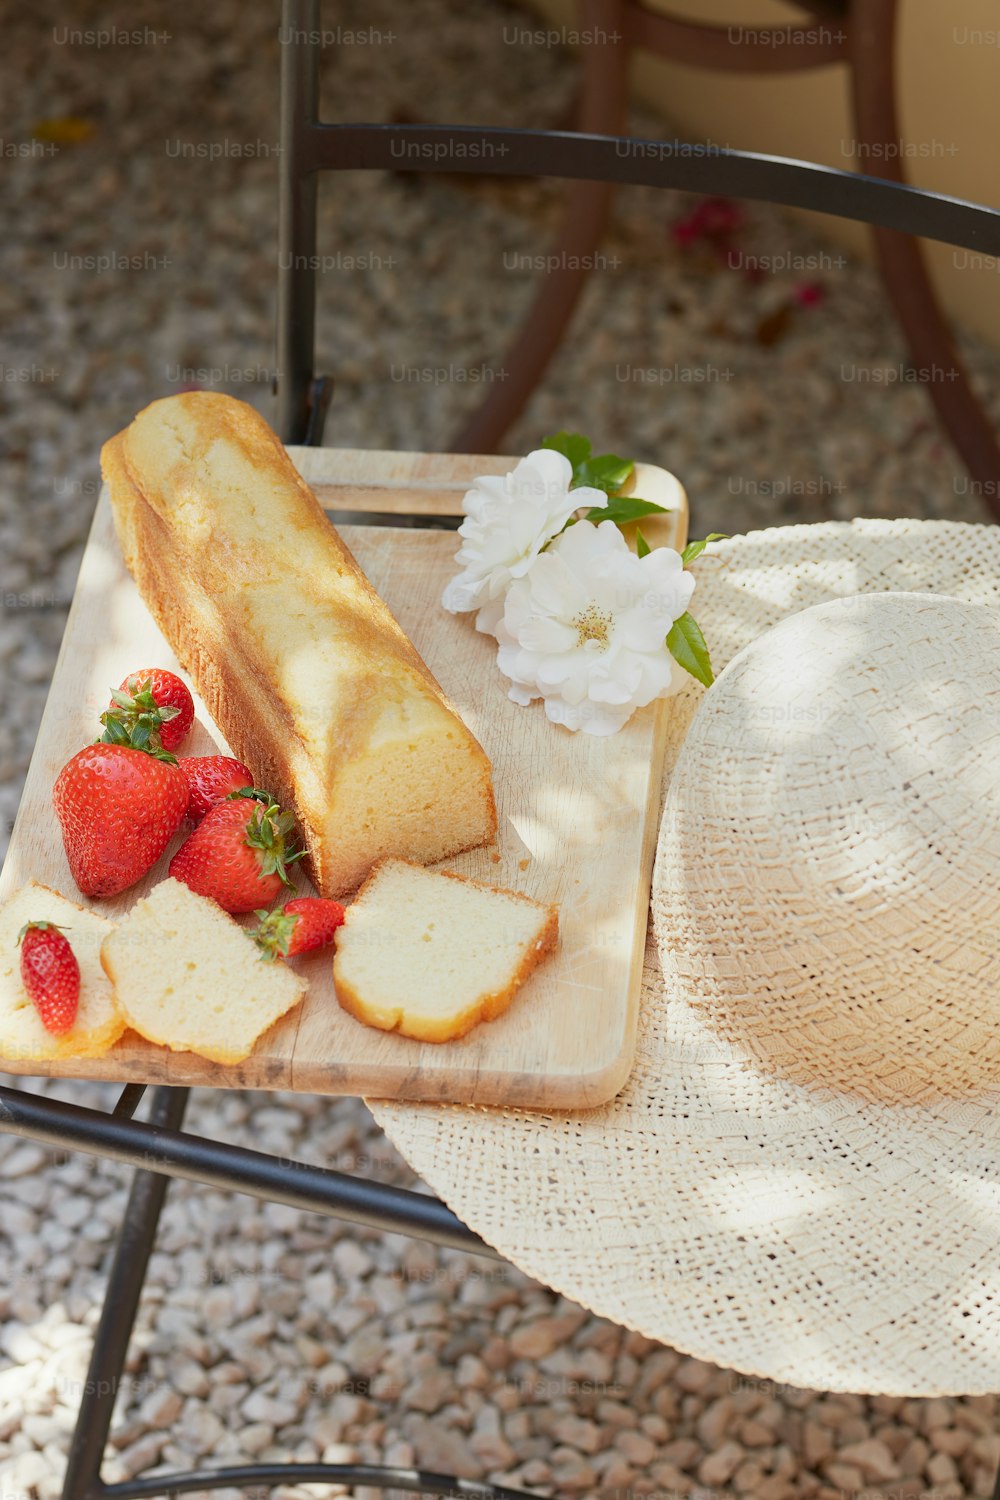 a piece of bread and some strawberries on a table